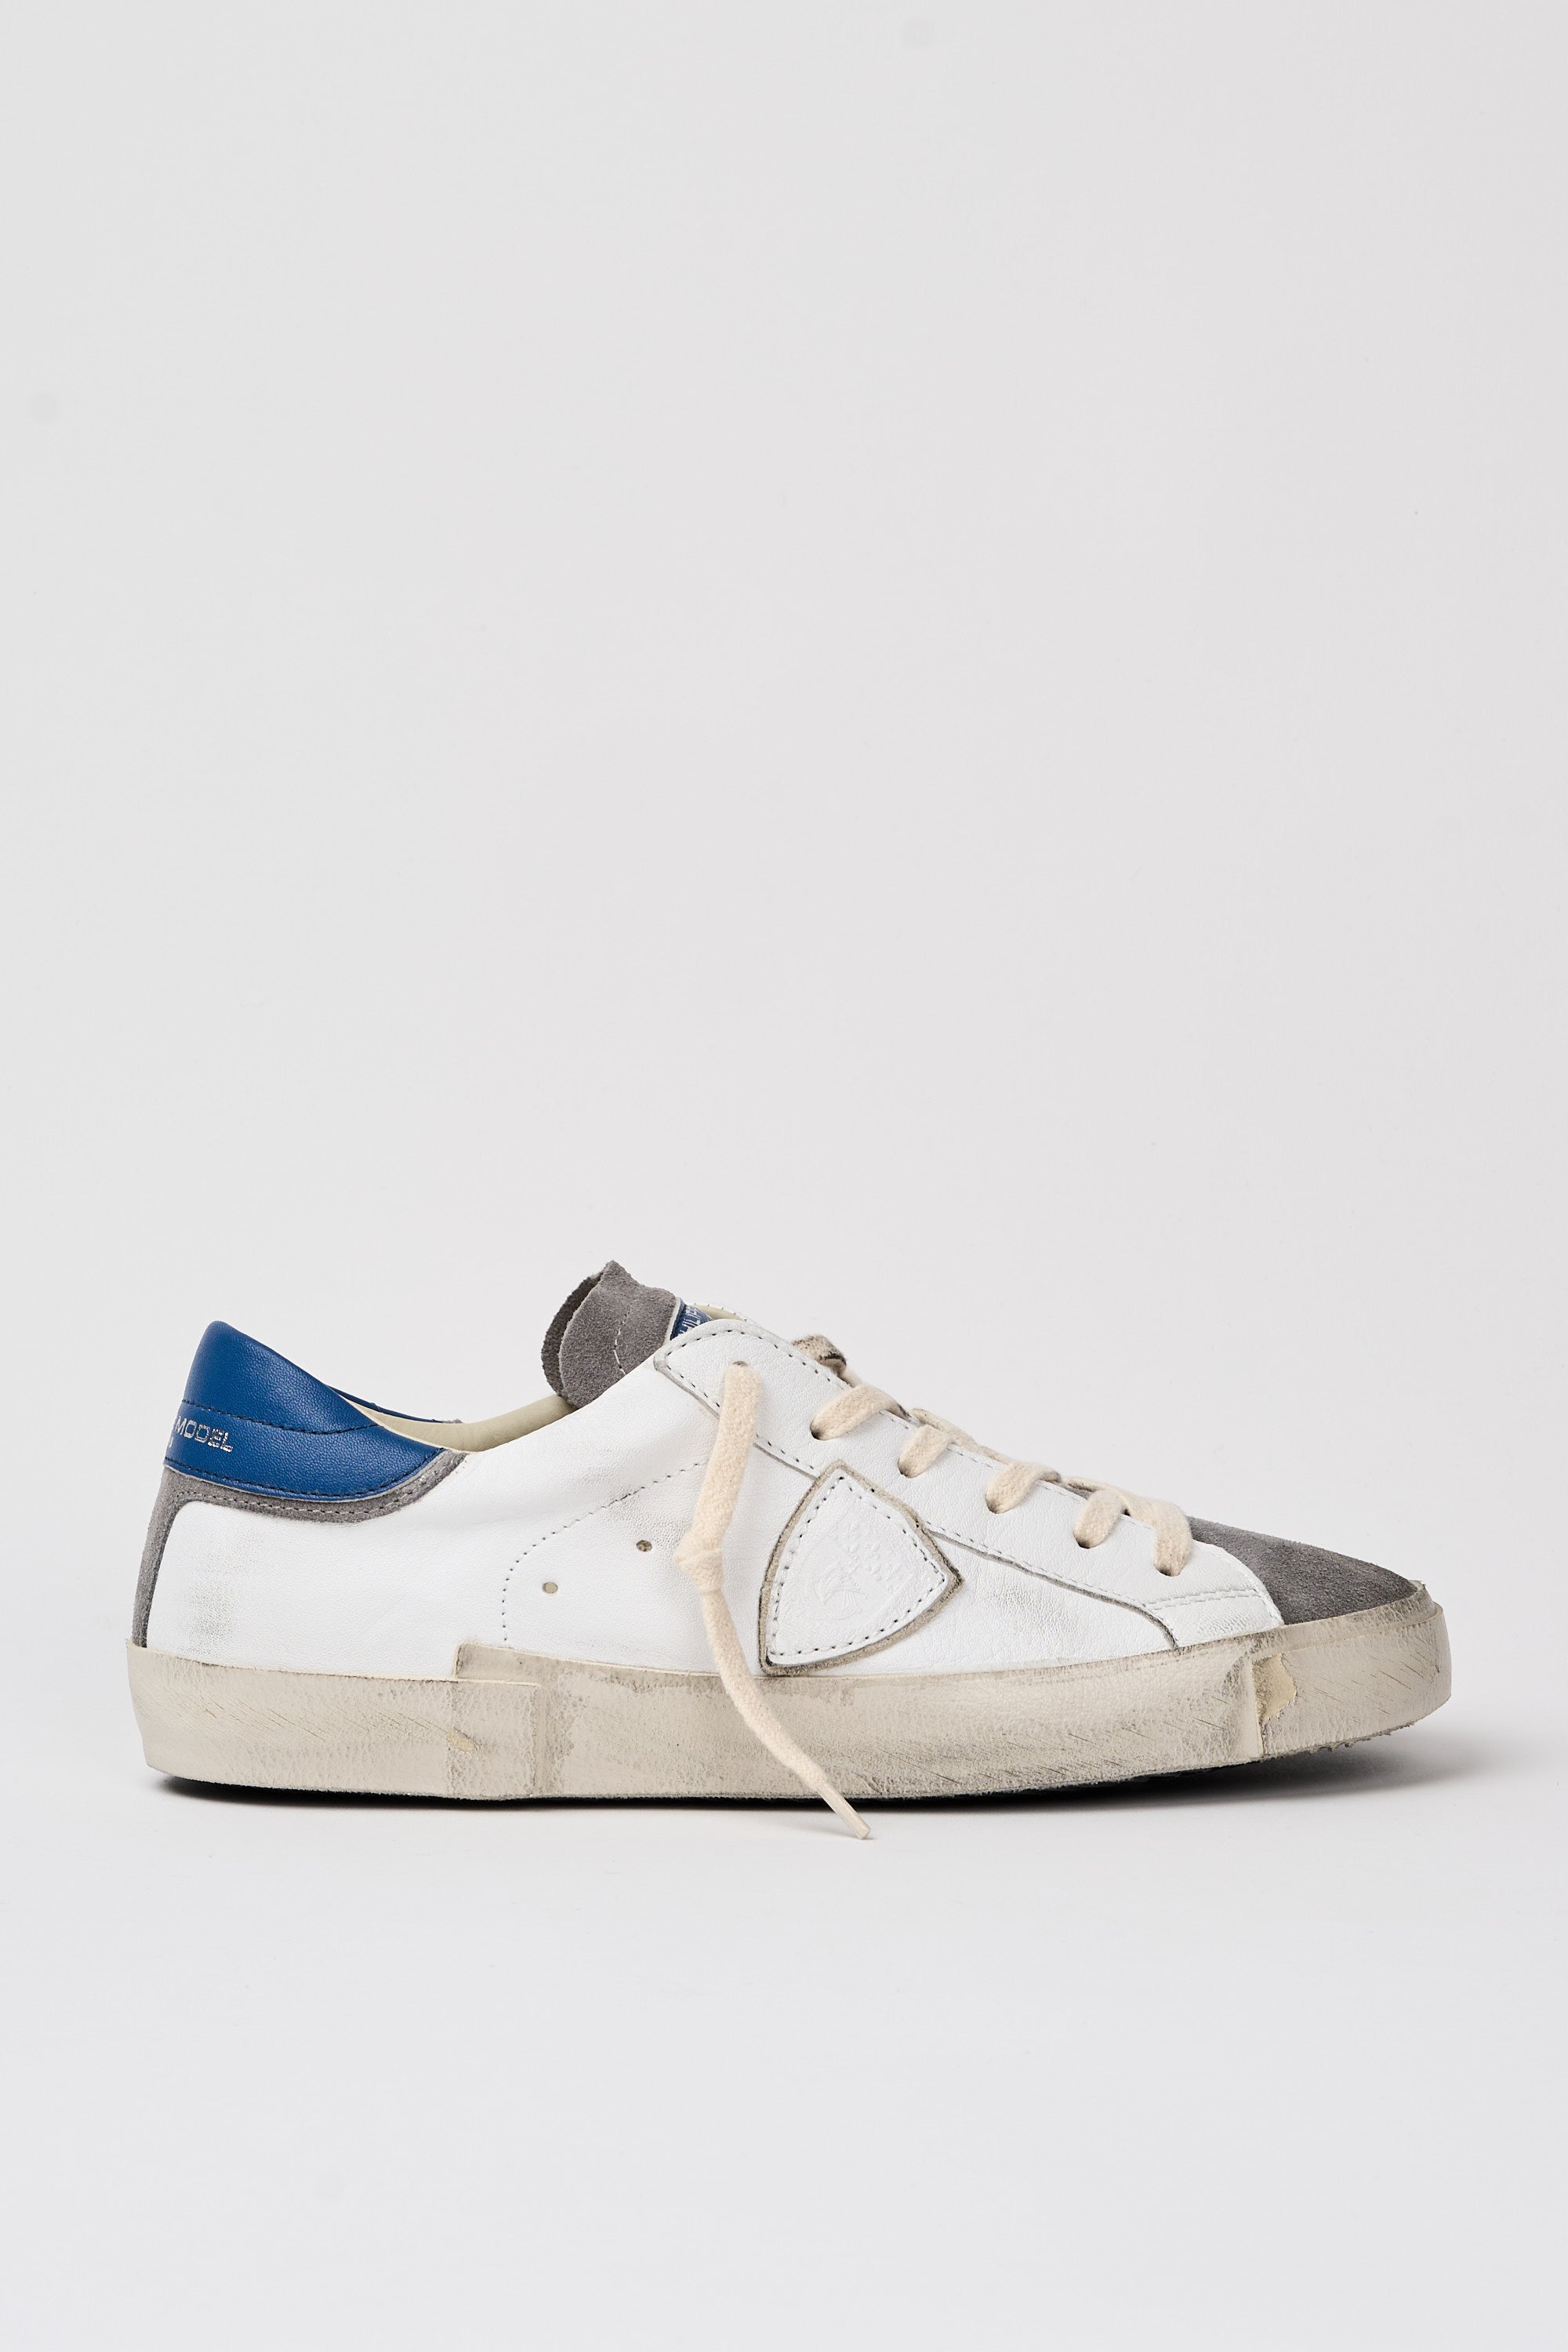 Philippe Model Sneaker Prsx Leather/Suede White/Blue-1